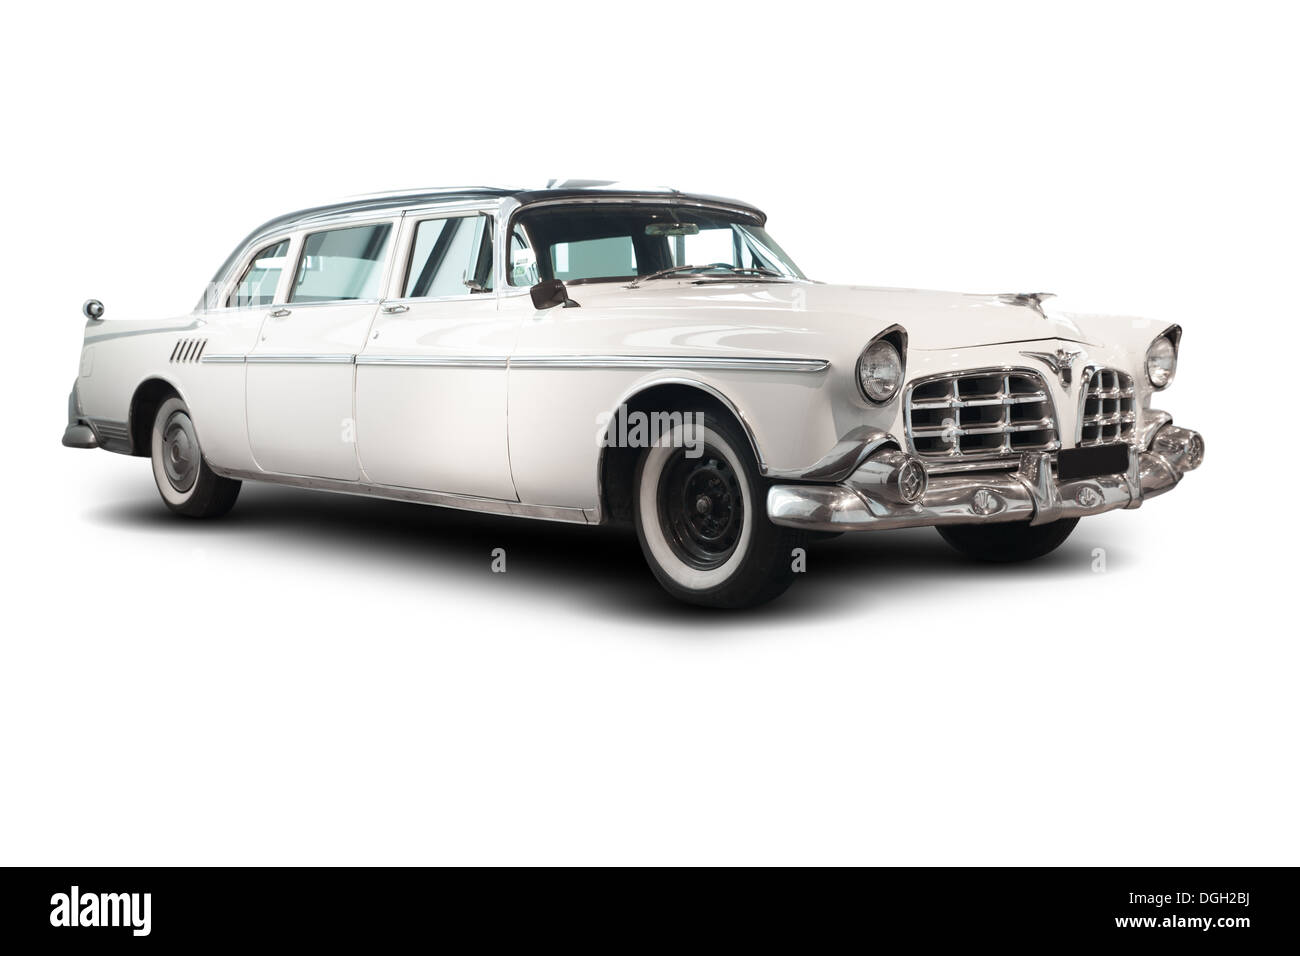 White Cadillac Imperial from 1950s Stock Photo